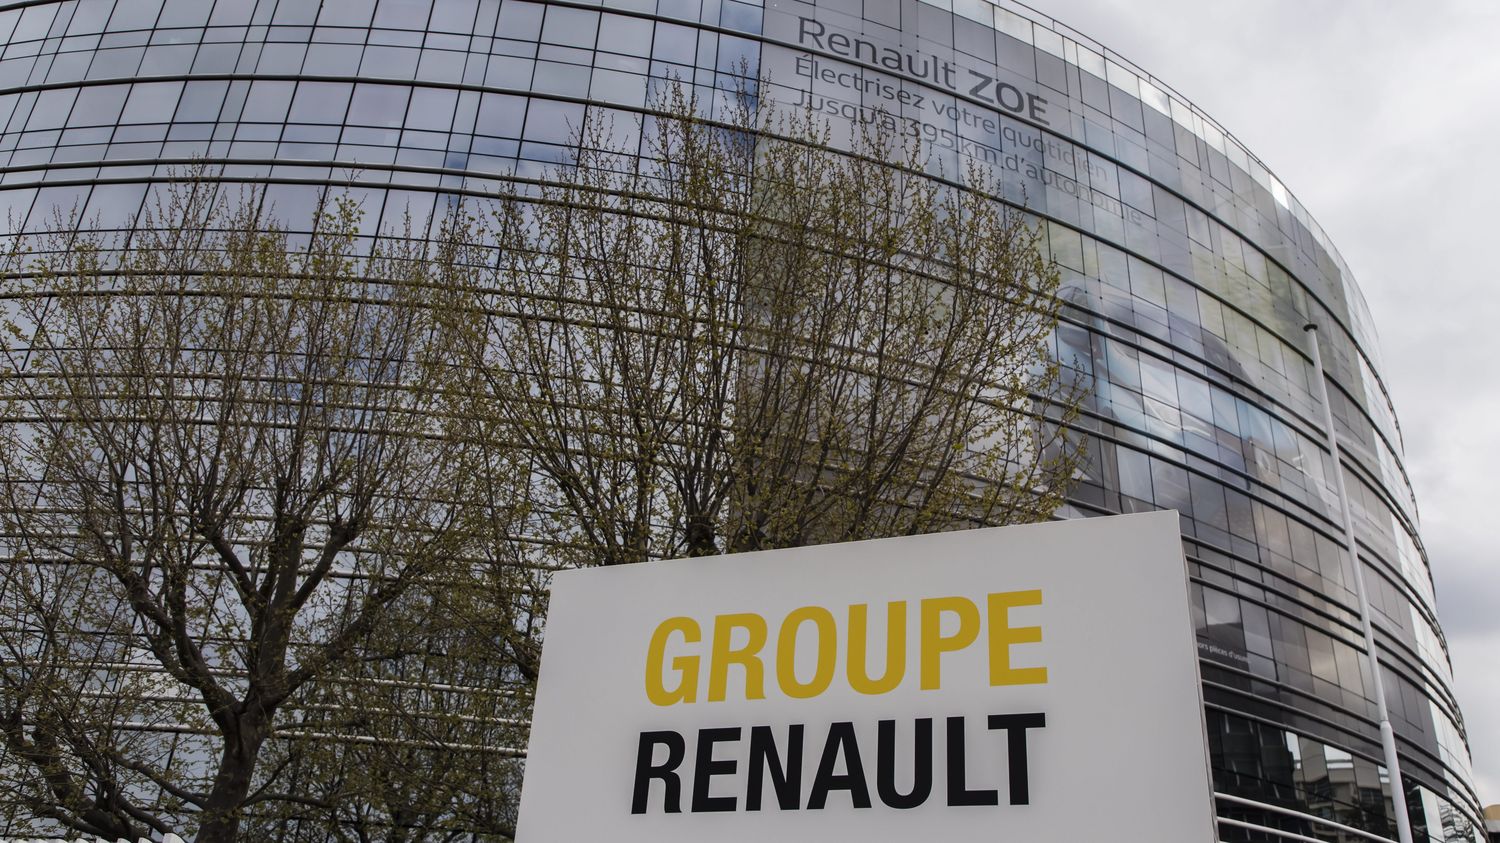 The case of fake Renault spies: The main defendant was sentenced to three years in prison, one of which was suspended